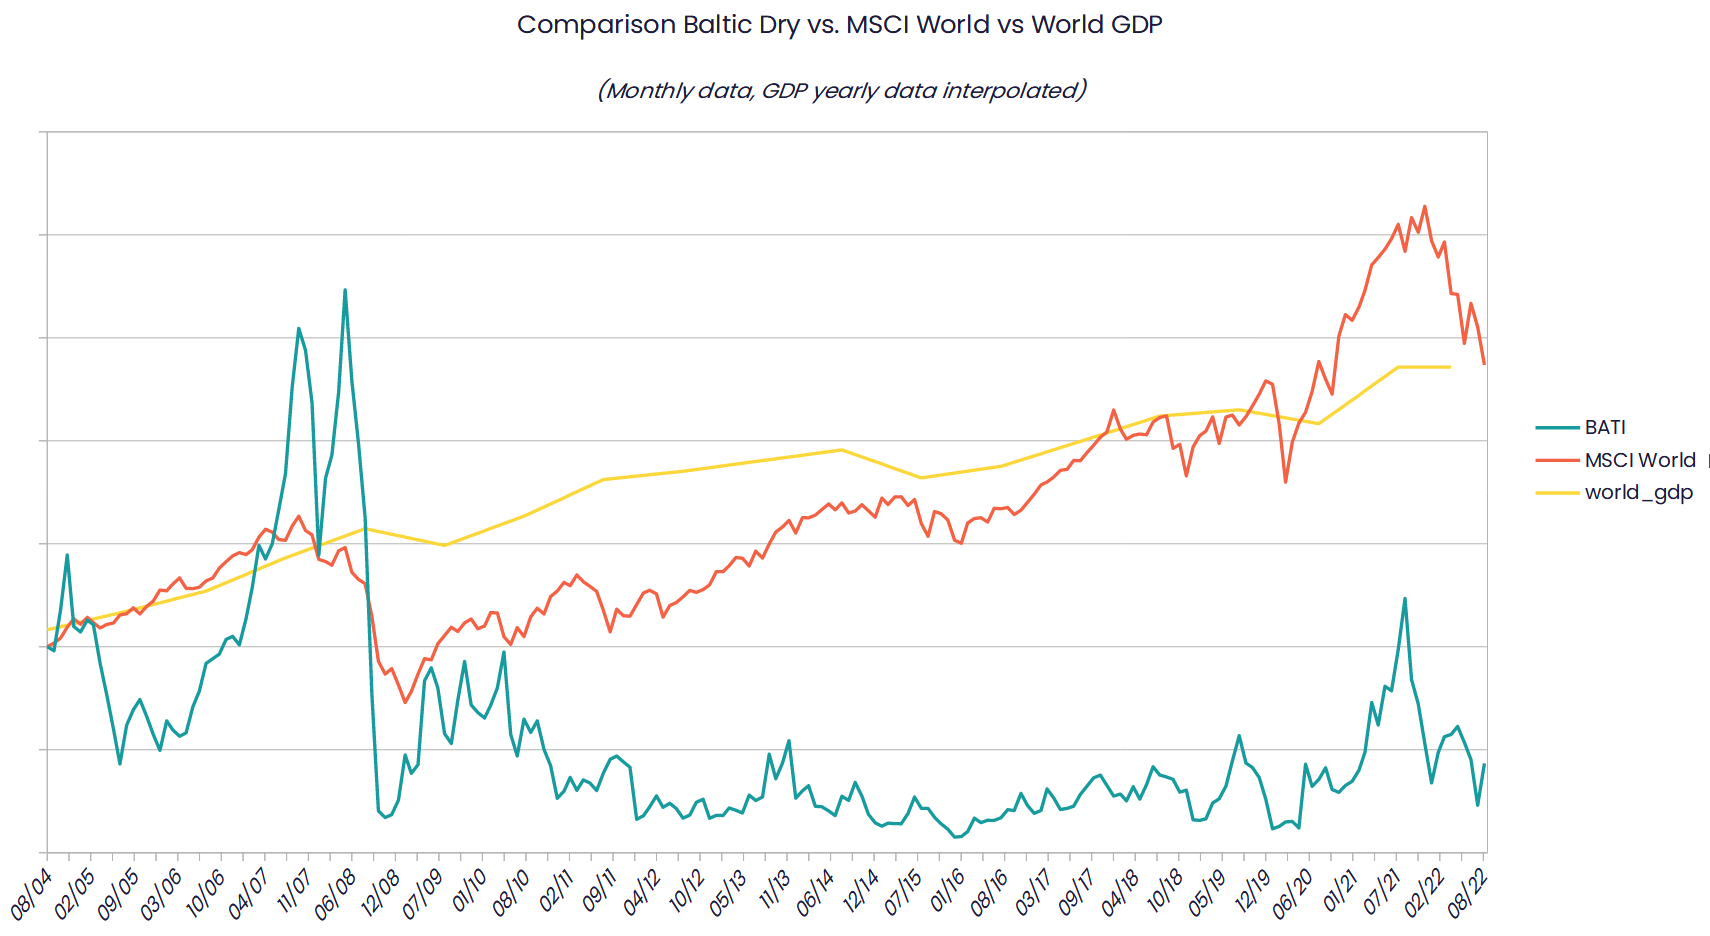 Monthly historic chart of Baltic Dry Index vs. MSCI world